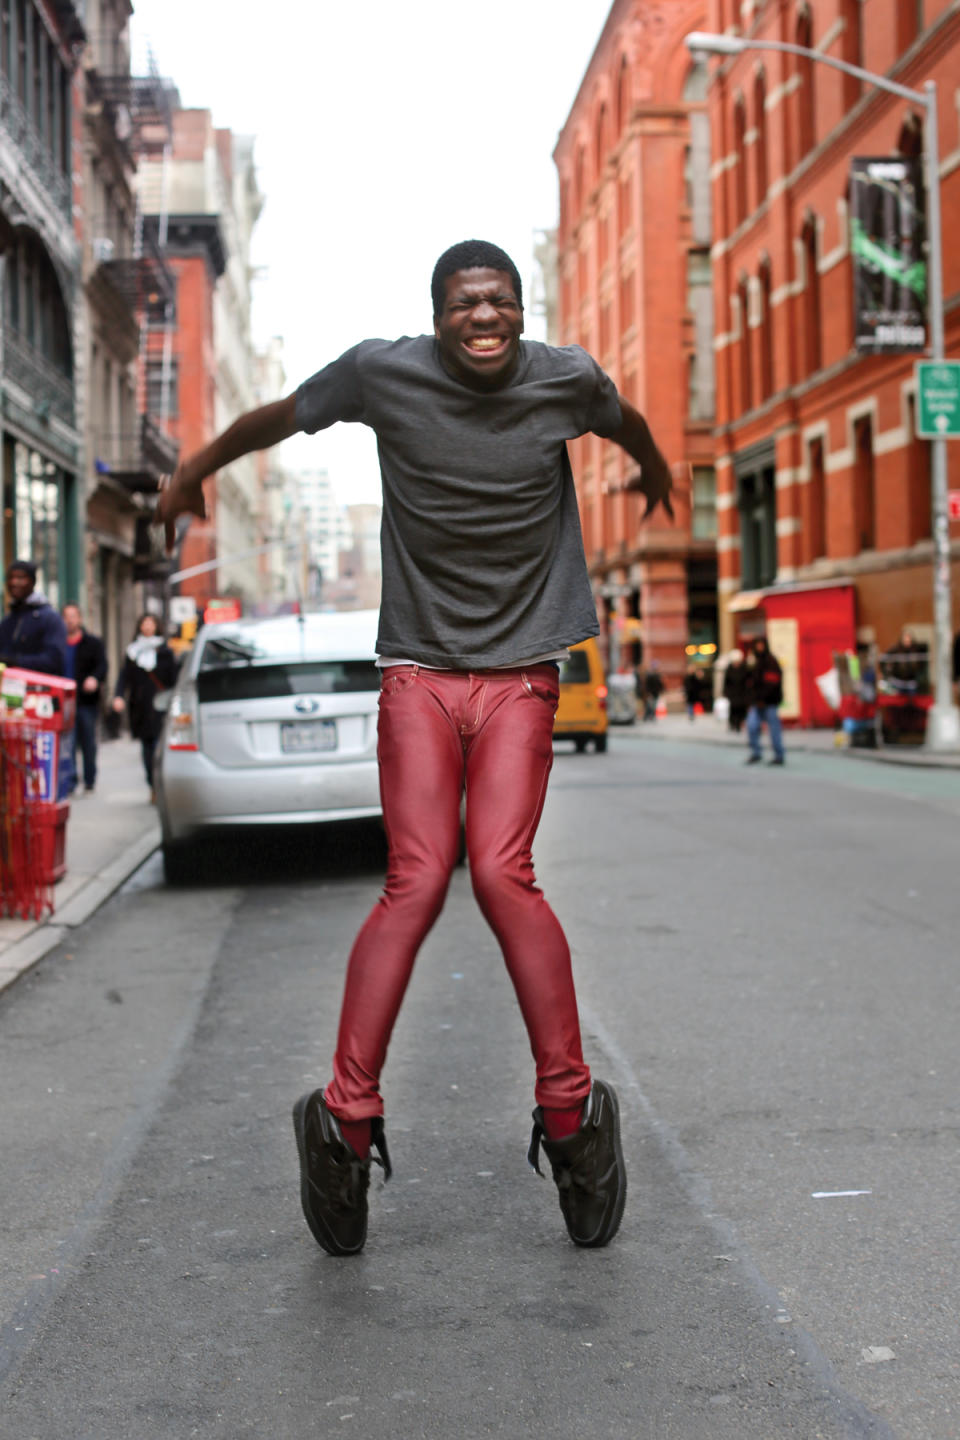 This image released by St. Martin's Press shows a man, who was dancing for tips, in New York. The image is one of many by photographer Brandon Stanton, creator of the blog and book titled, "Humans of New York." Stanton’s magical blend of portraits and poignant, pithy storytelling has earned HONY more than 2 million followers online. His book will be released on Oct. 15. (AP Photo/St. Martin's Press, Brandon Stanton)